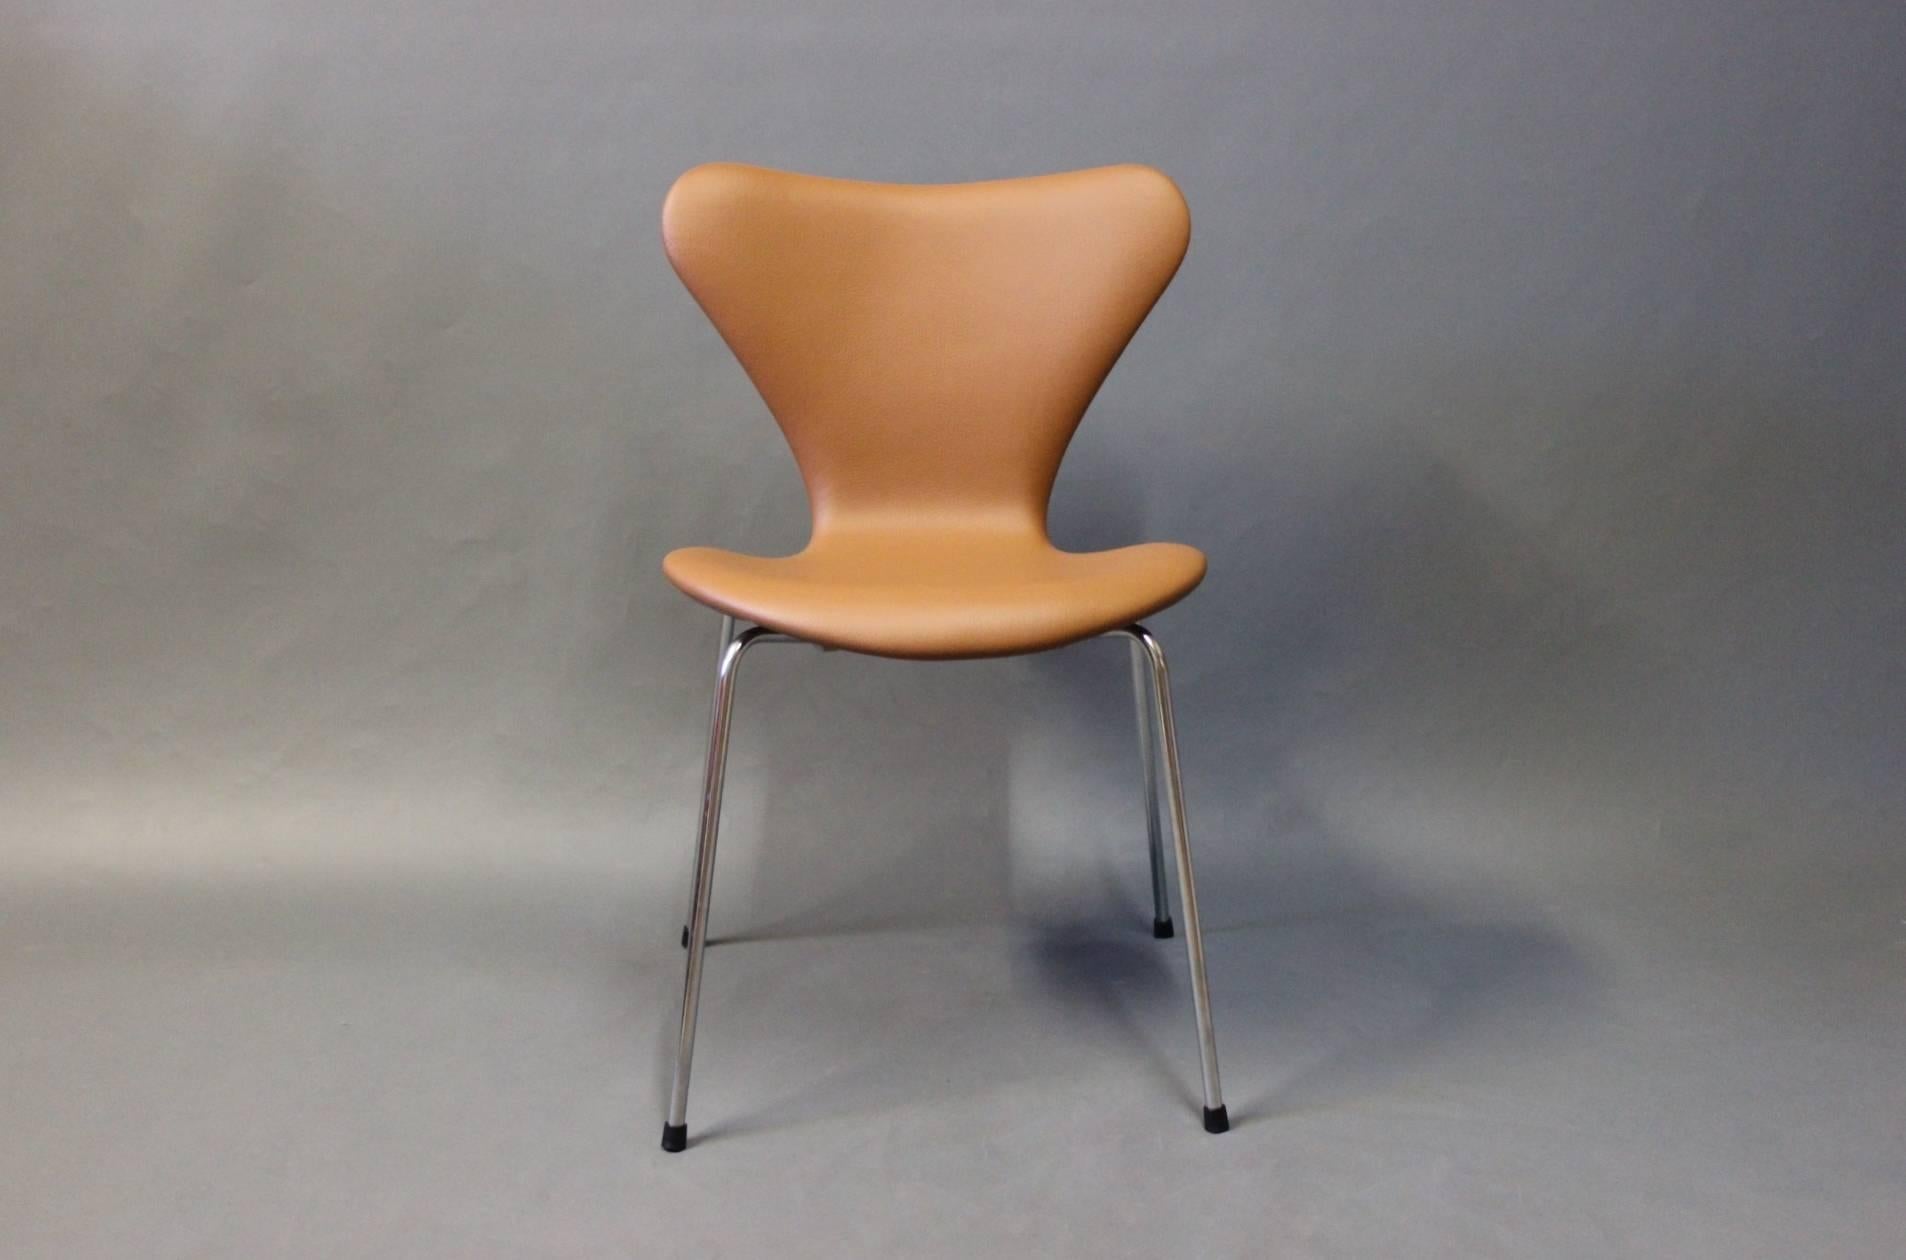 Danish Set of Six Chairs Series 7 Chairs, Model 3107, by Arne Jacobsen and Fritz Hansen